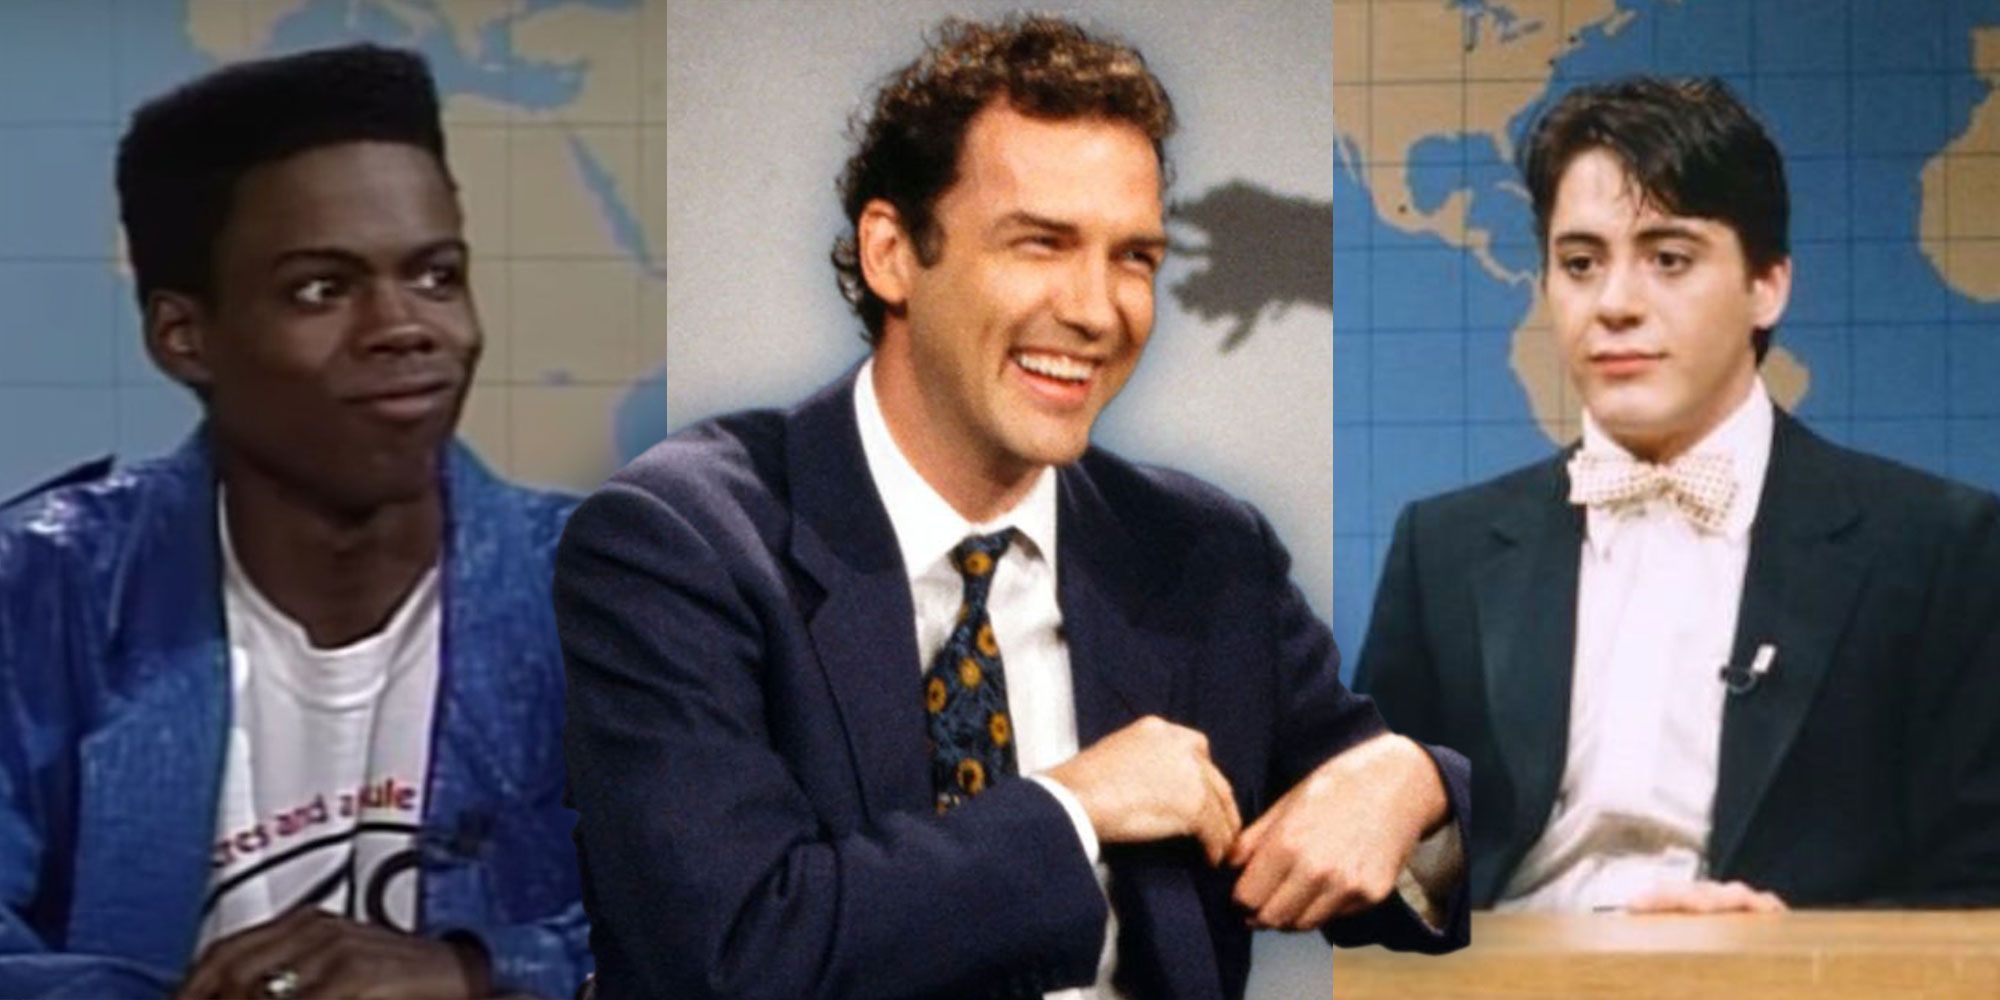 Three side by side images of fired SNL cast members.